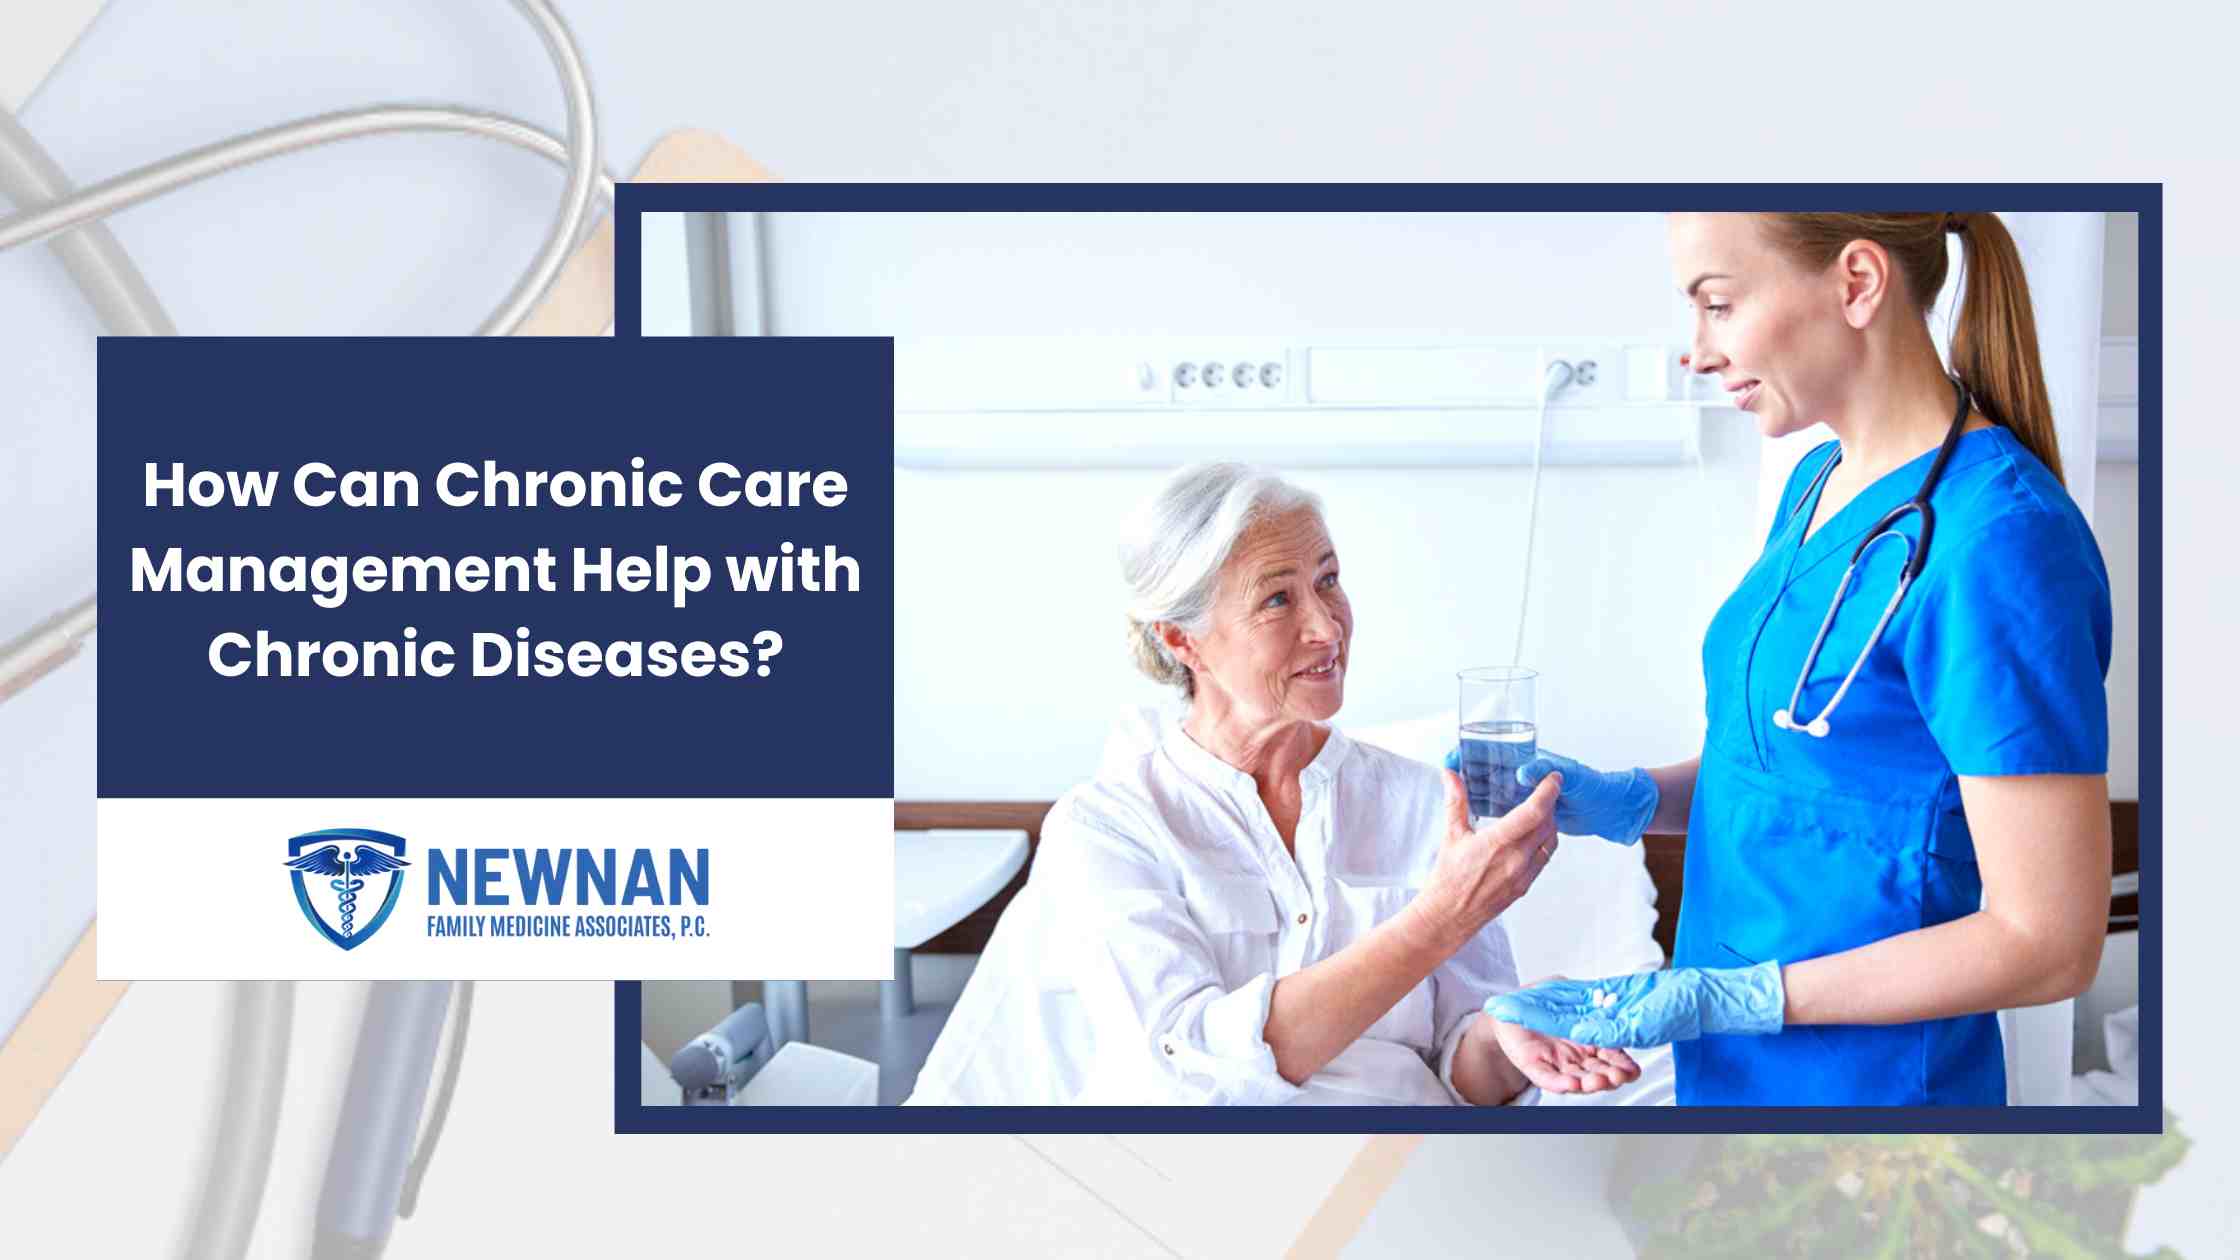 How Can Chronic Care Management Help with Chronic Diseases?